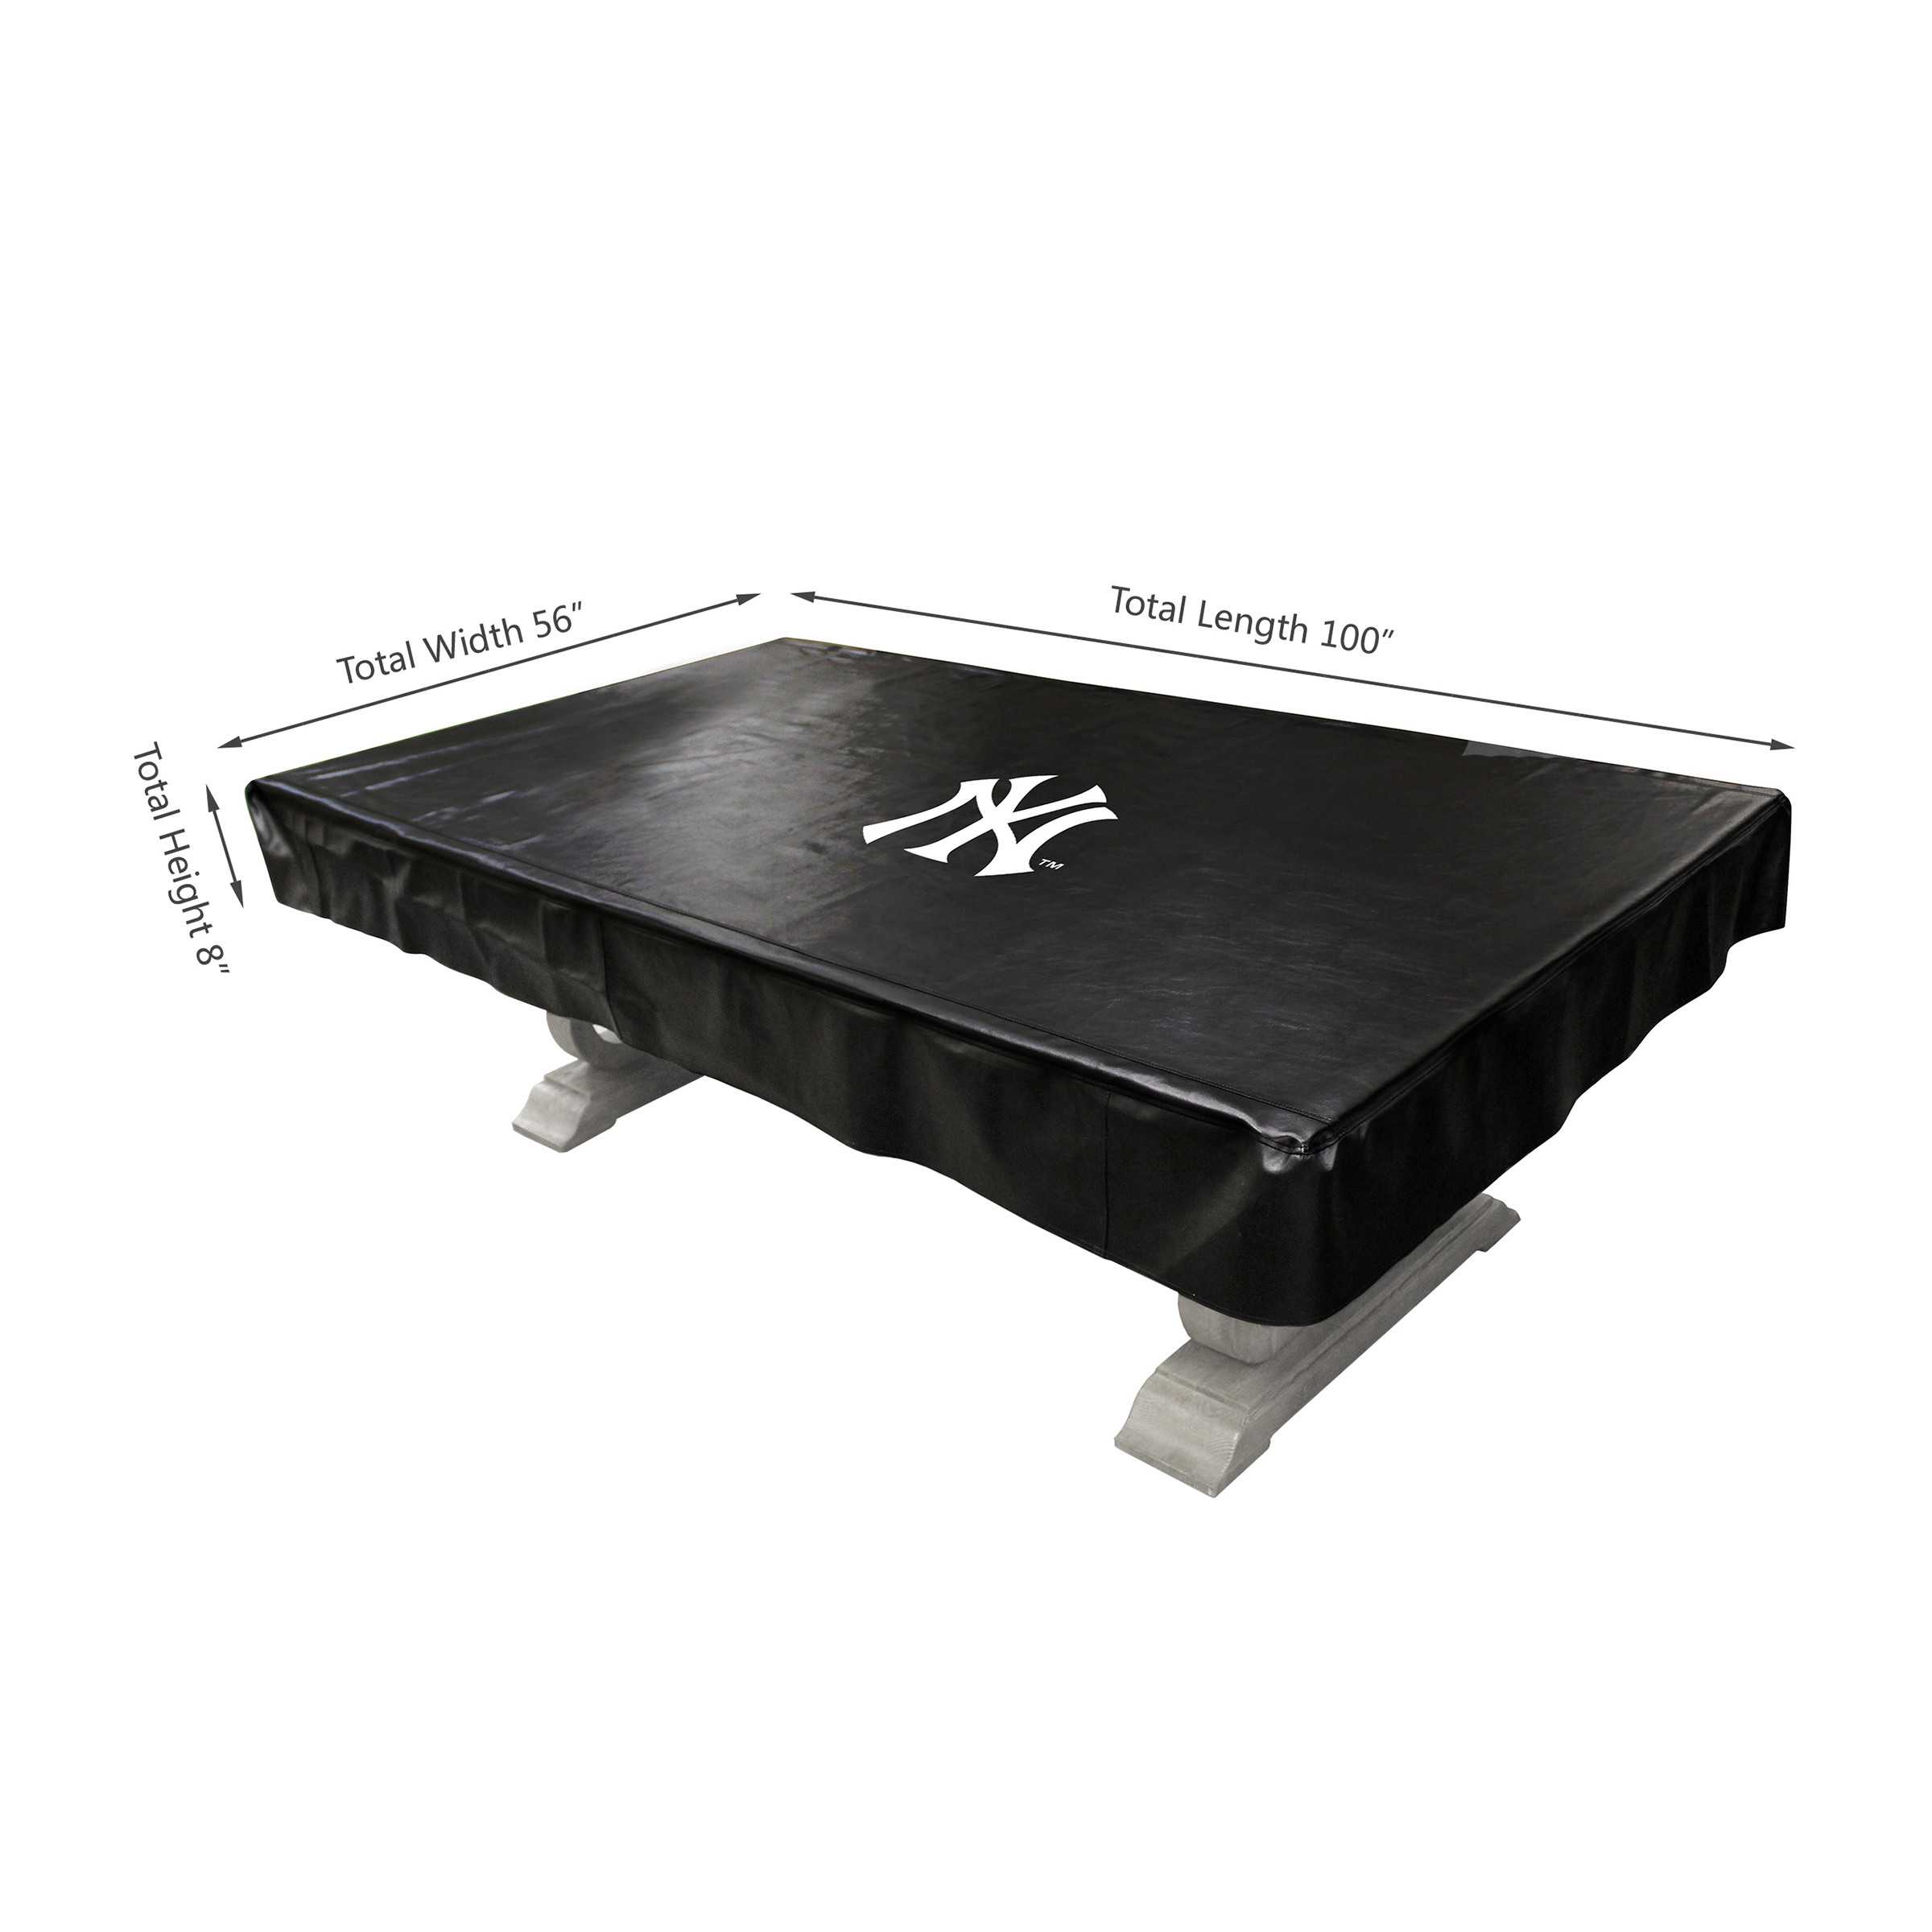 NEW YORK YANKEE 8' DELUXE POOL TABLE COVER